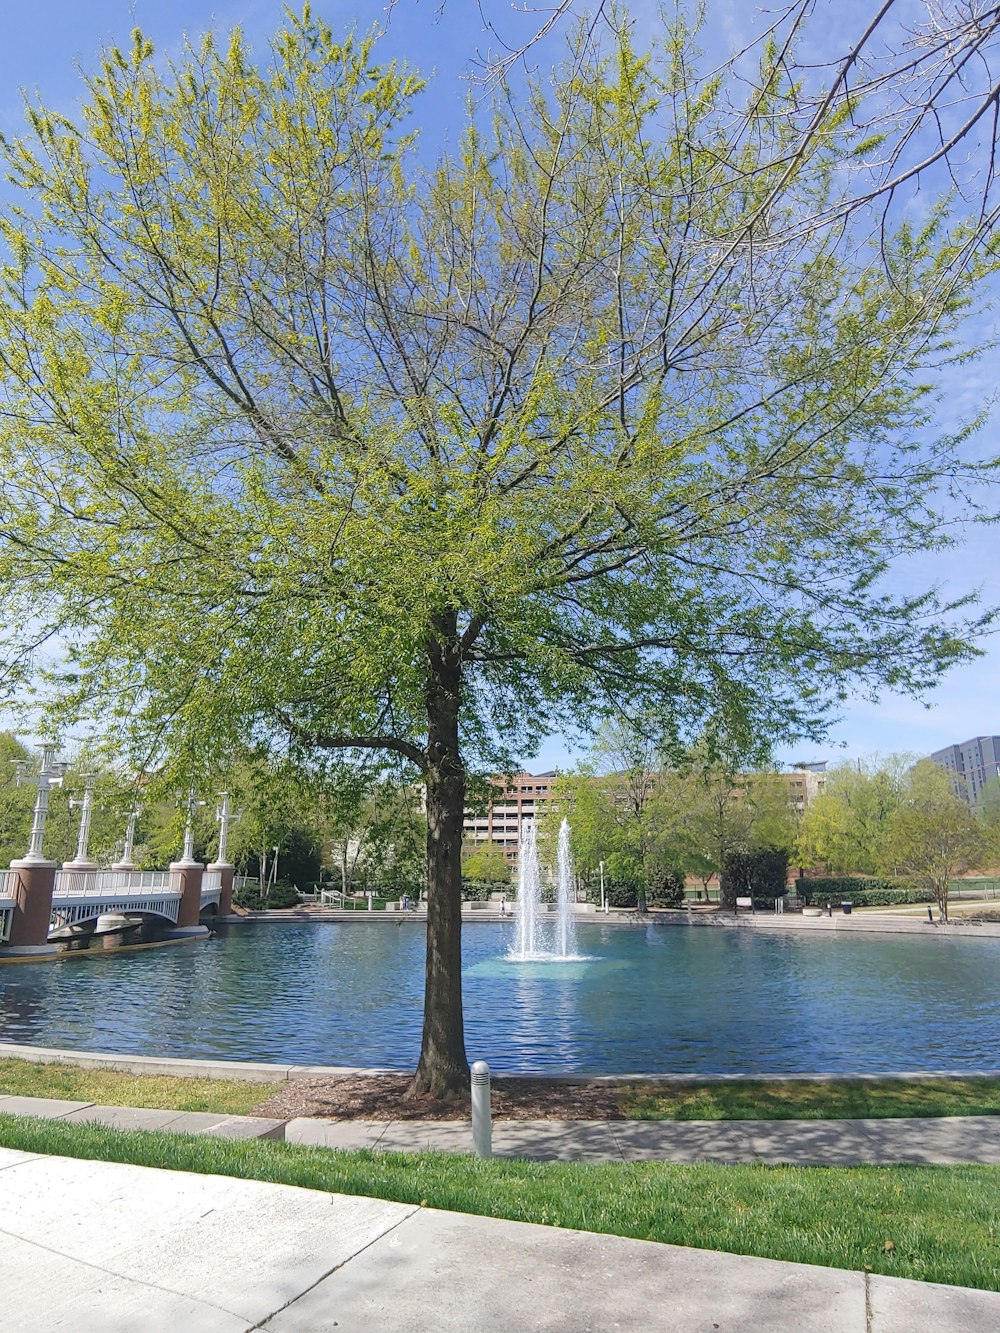 a tree in a park with a fountain in the background